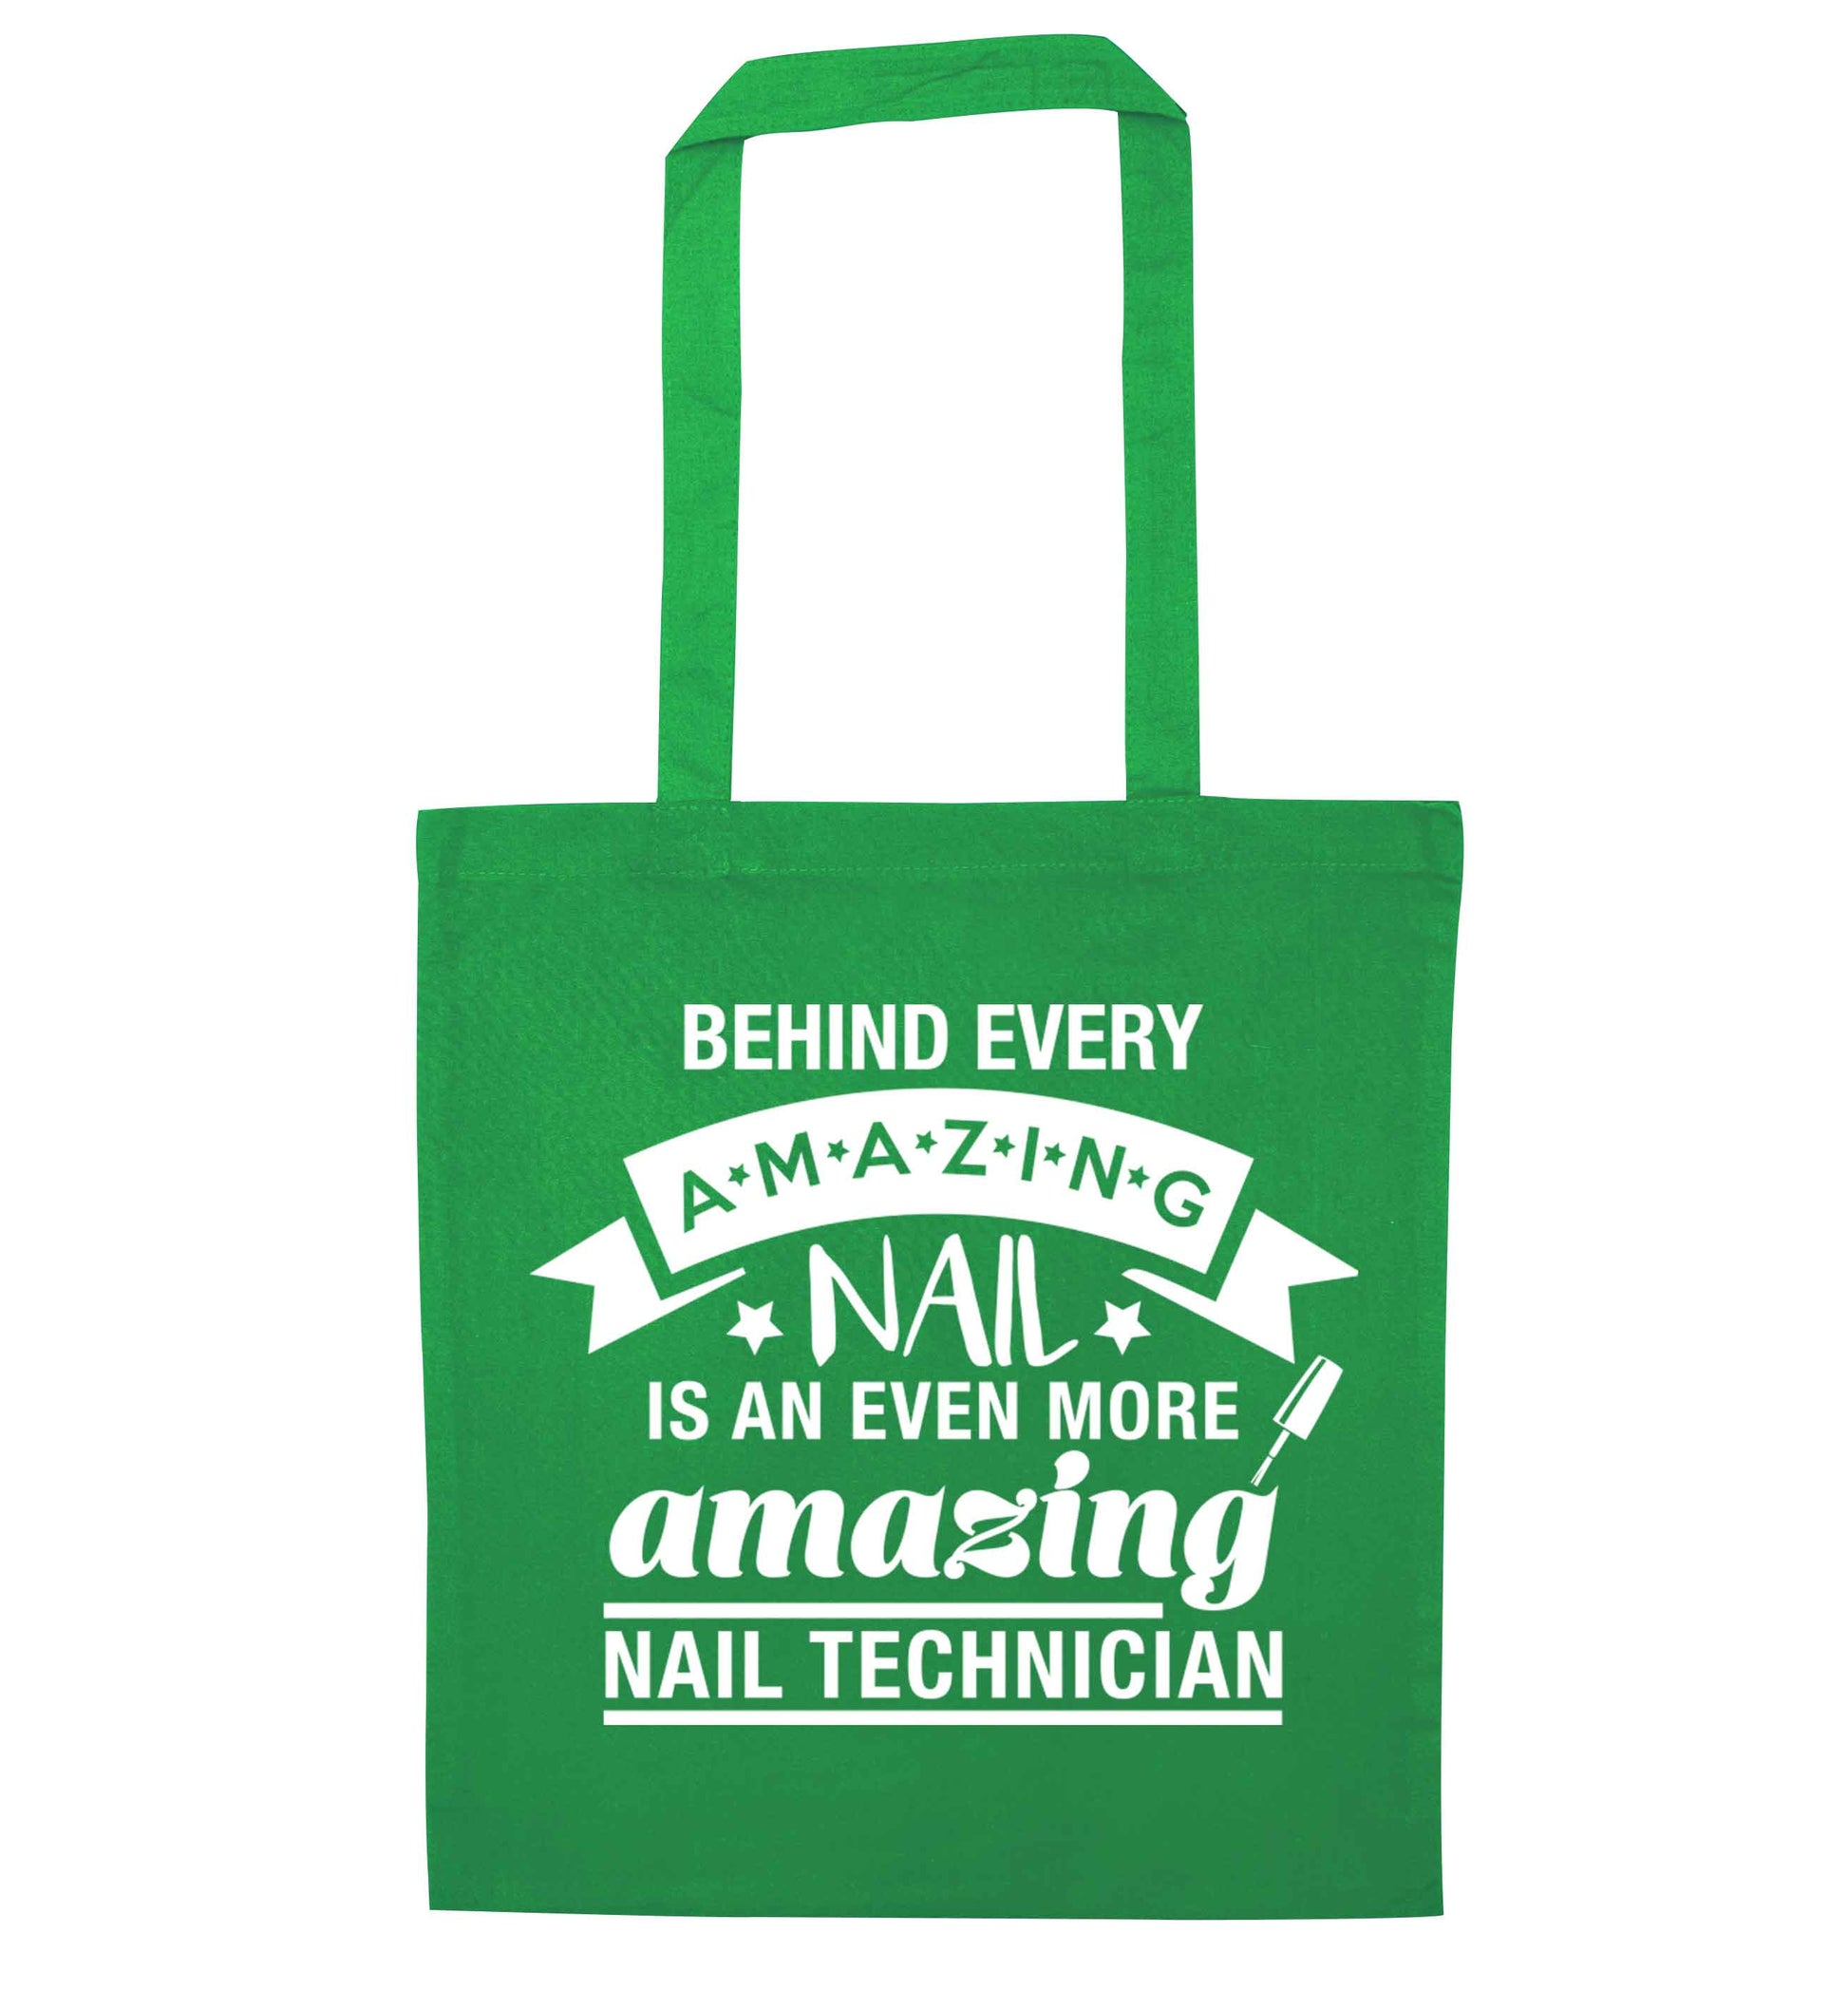 Behind every amazing nail is an even more amazing nail technician green tote bag